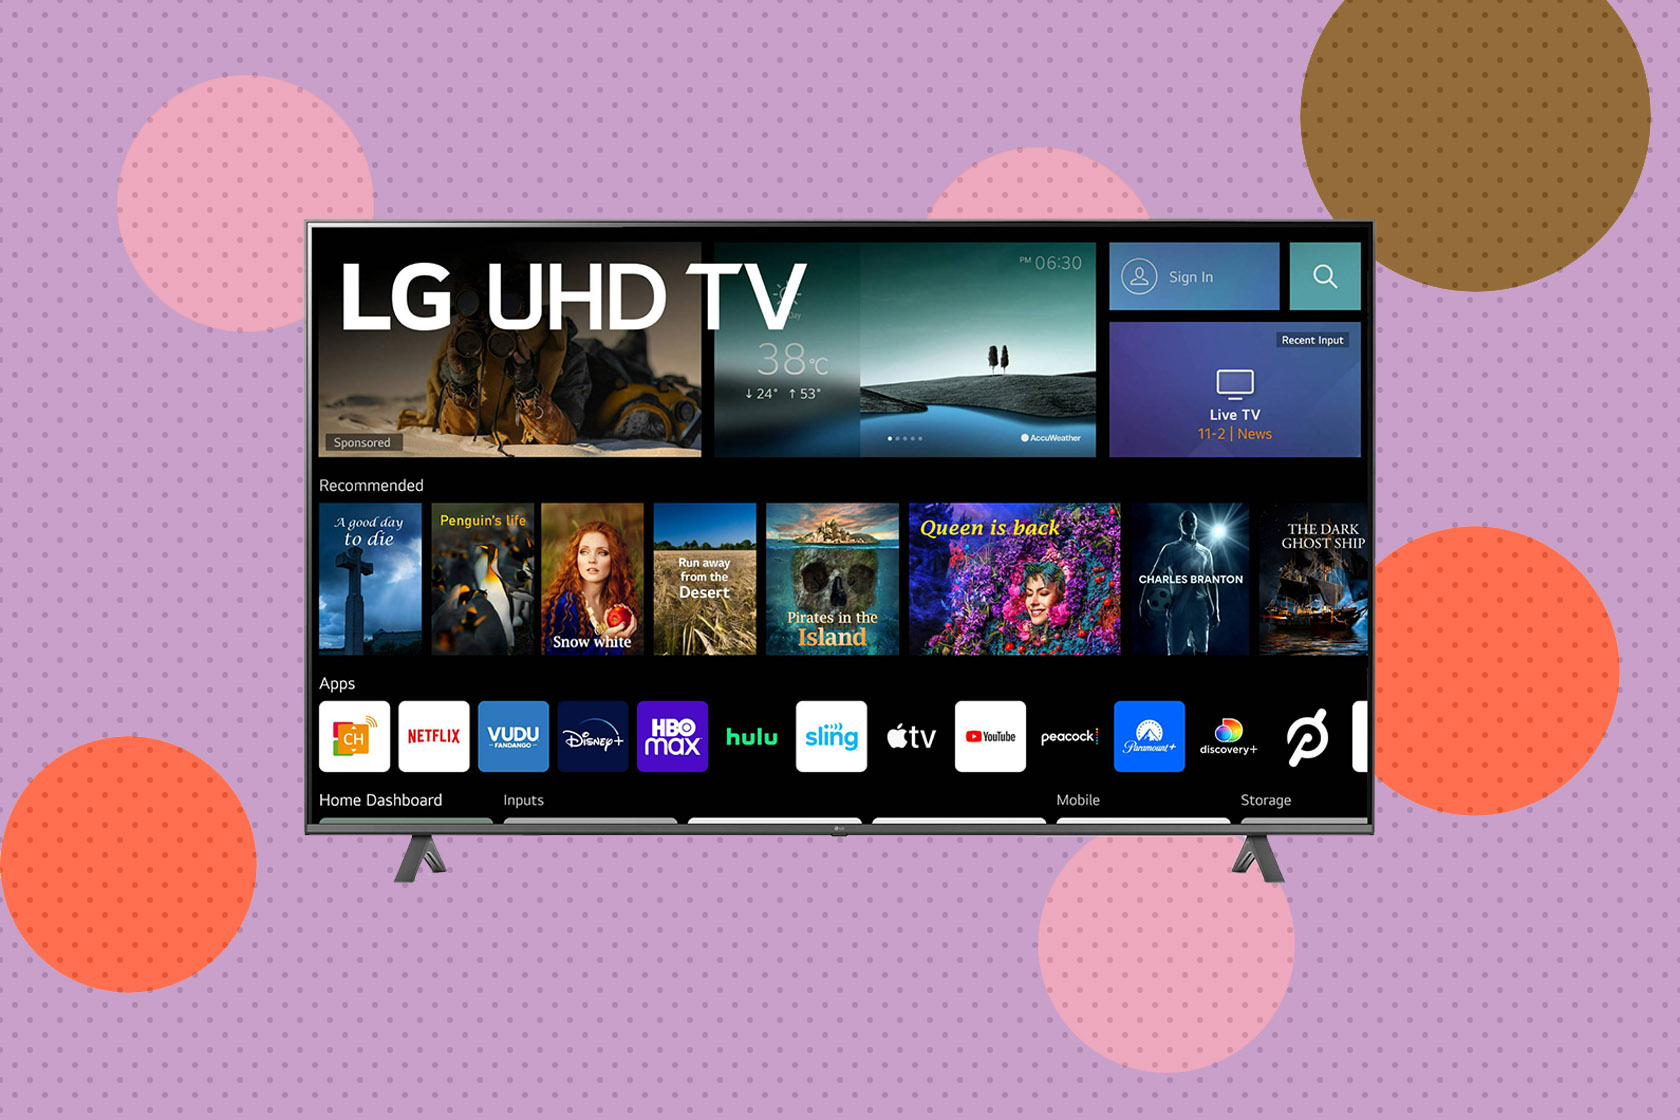 Save $200 on an 86-inch LG smart TV ahead of Black Friday